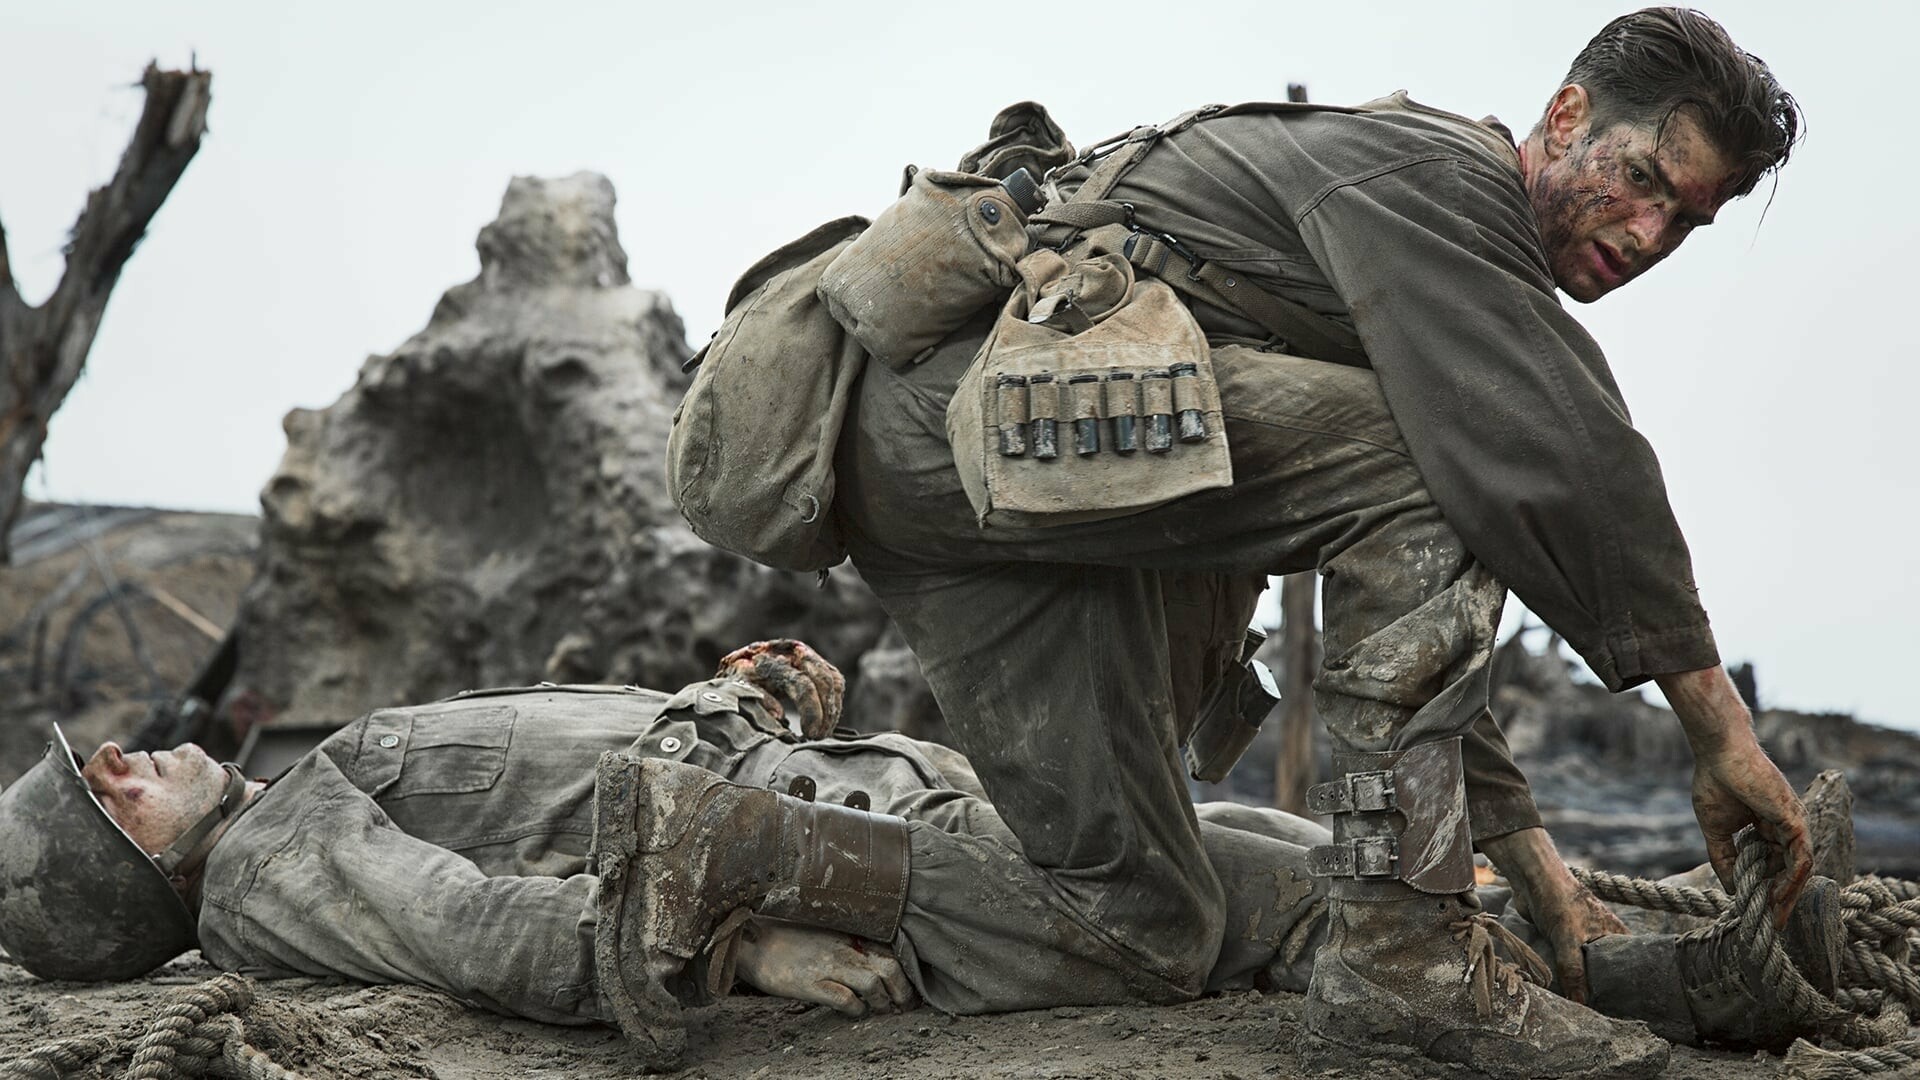 Hacksaw Ridge: Desmond Doss, the only conscientious objector to receive the Medal of Honor for his actions during the war. 1920x1080 Full HD Background.